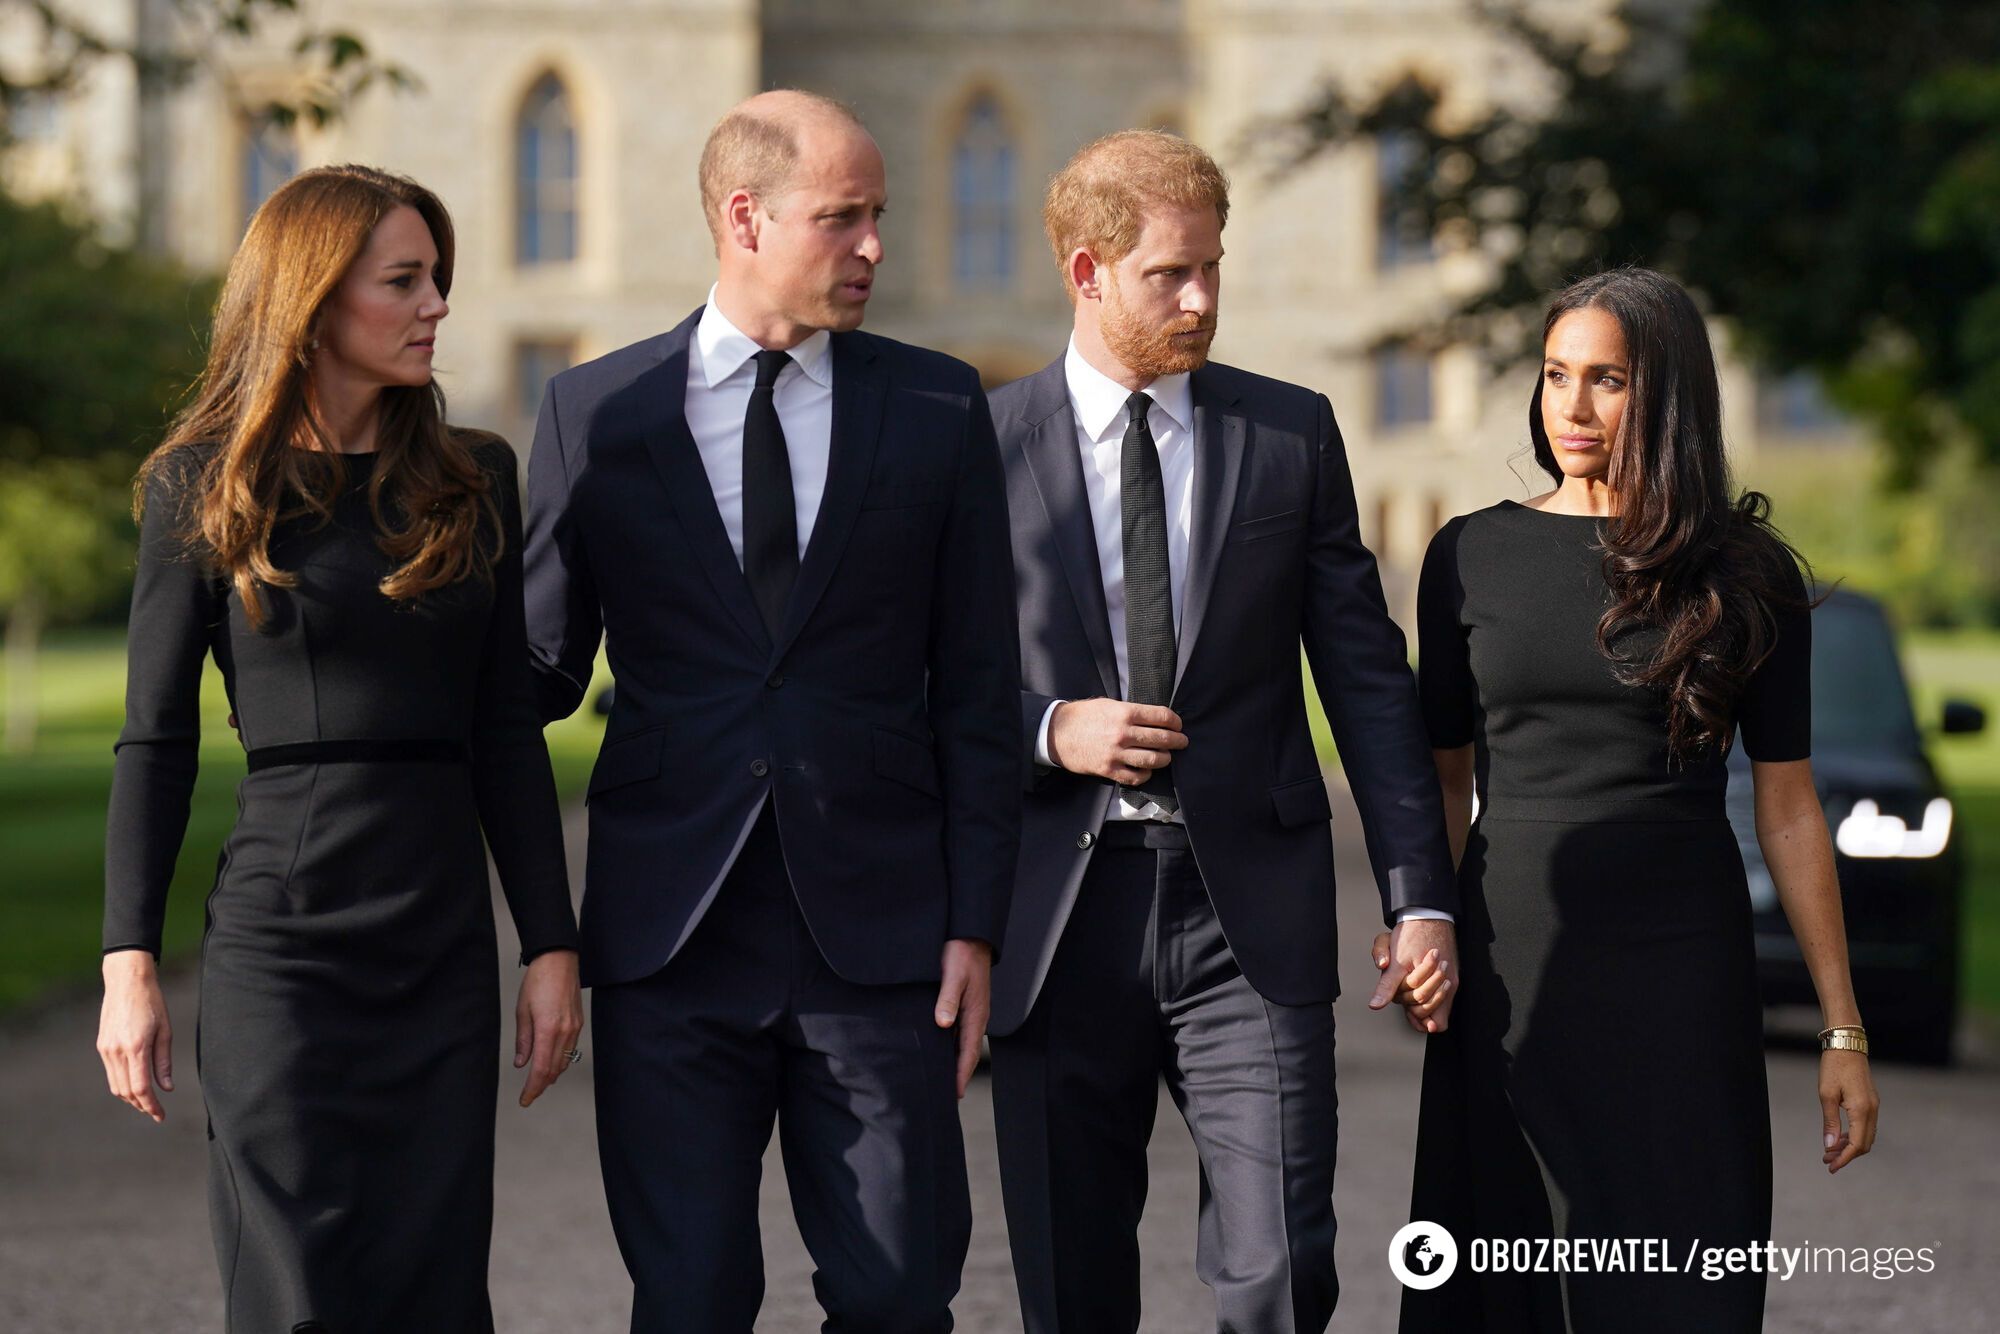 The royal family has removed Prince Harry's statement about his affair with Meghan Markle from the official website